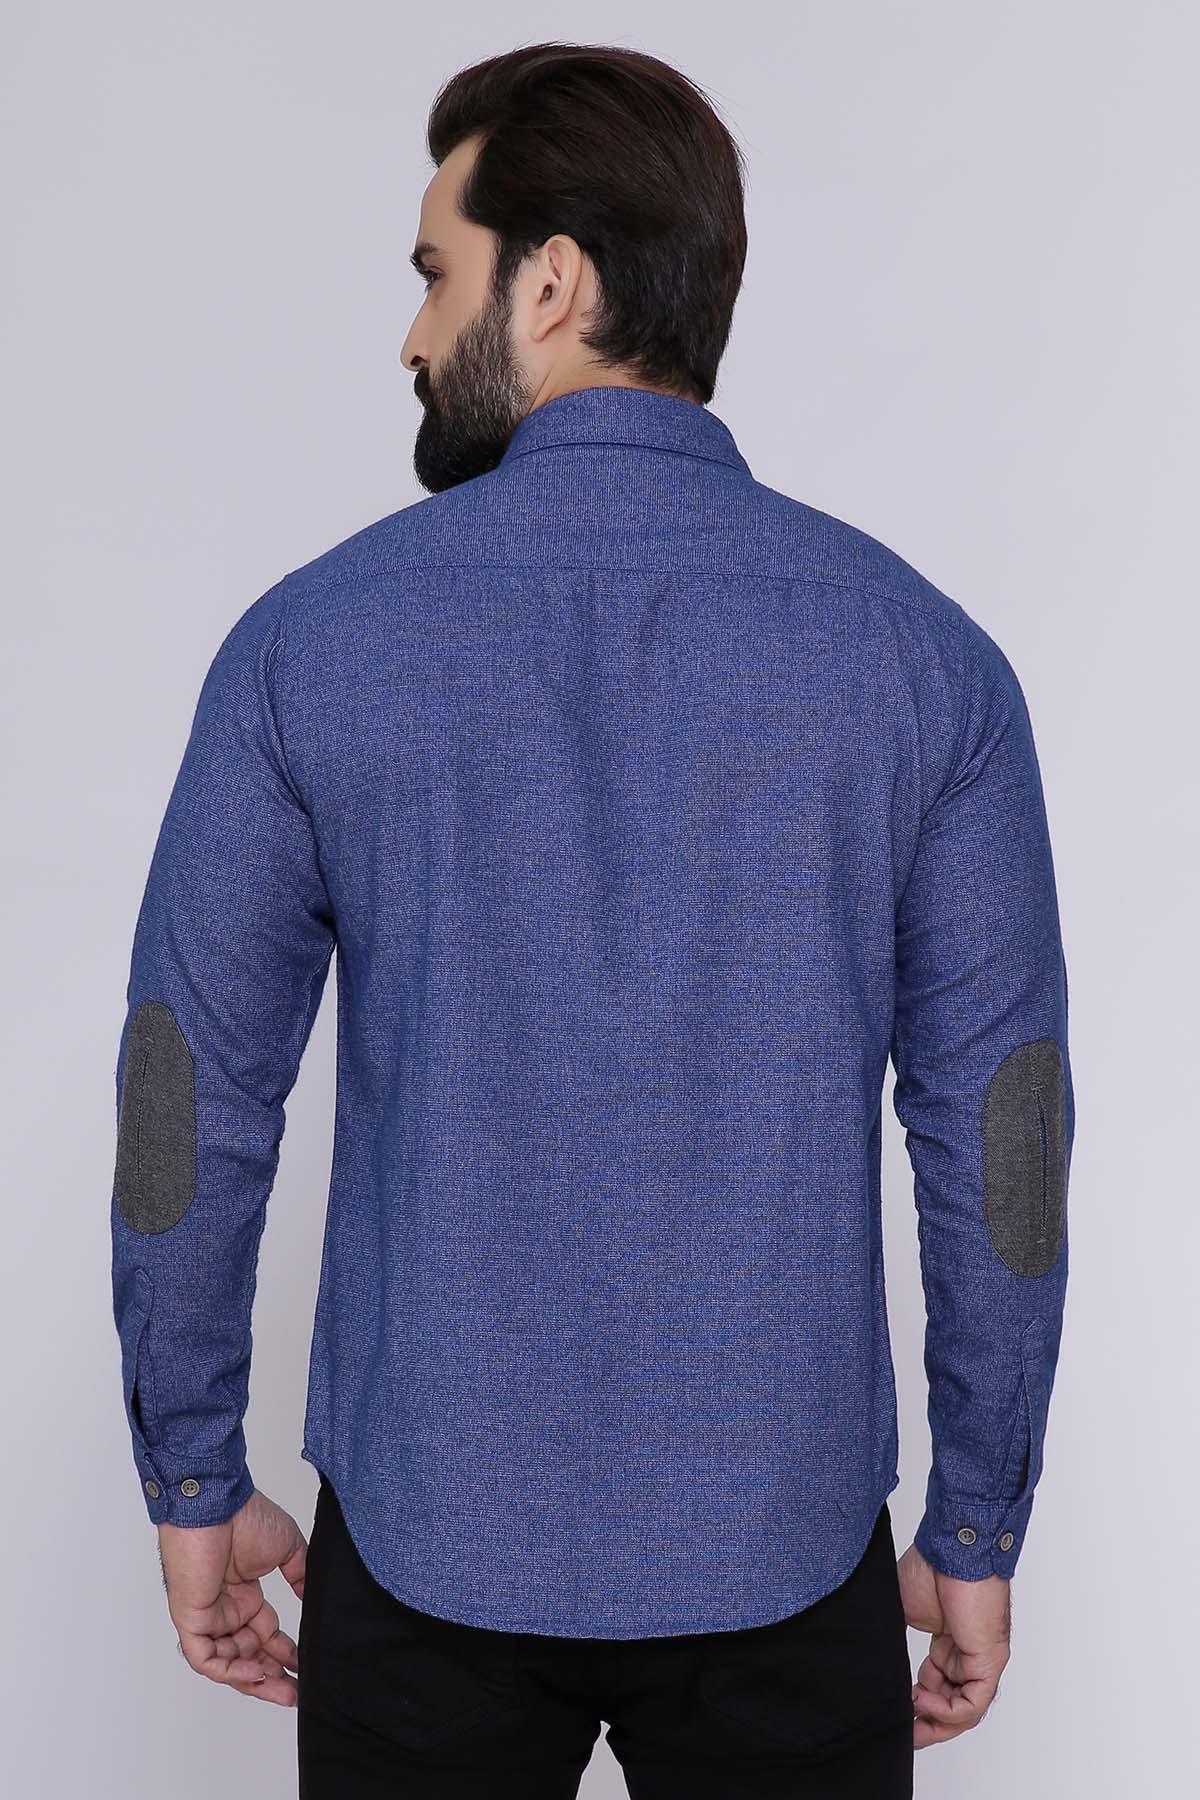 CASUAL SHIRT FULL SLEEVE SLIM FIT BLUE at Charcoal Clothing